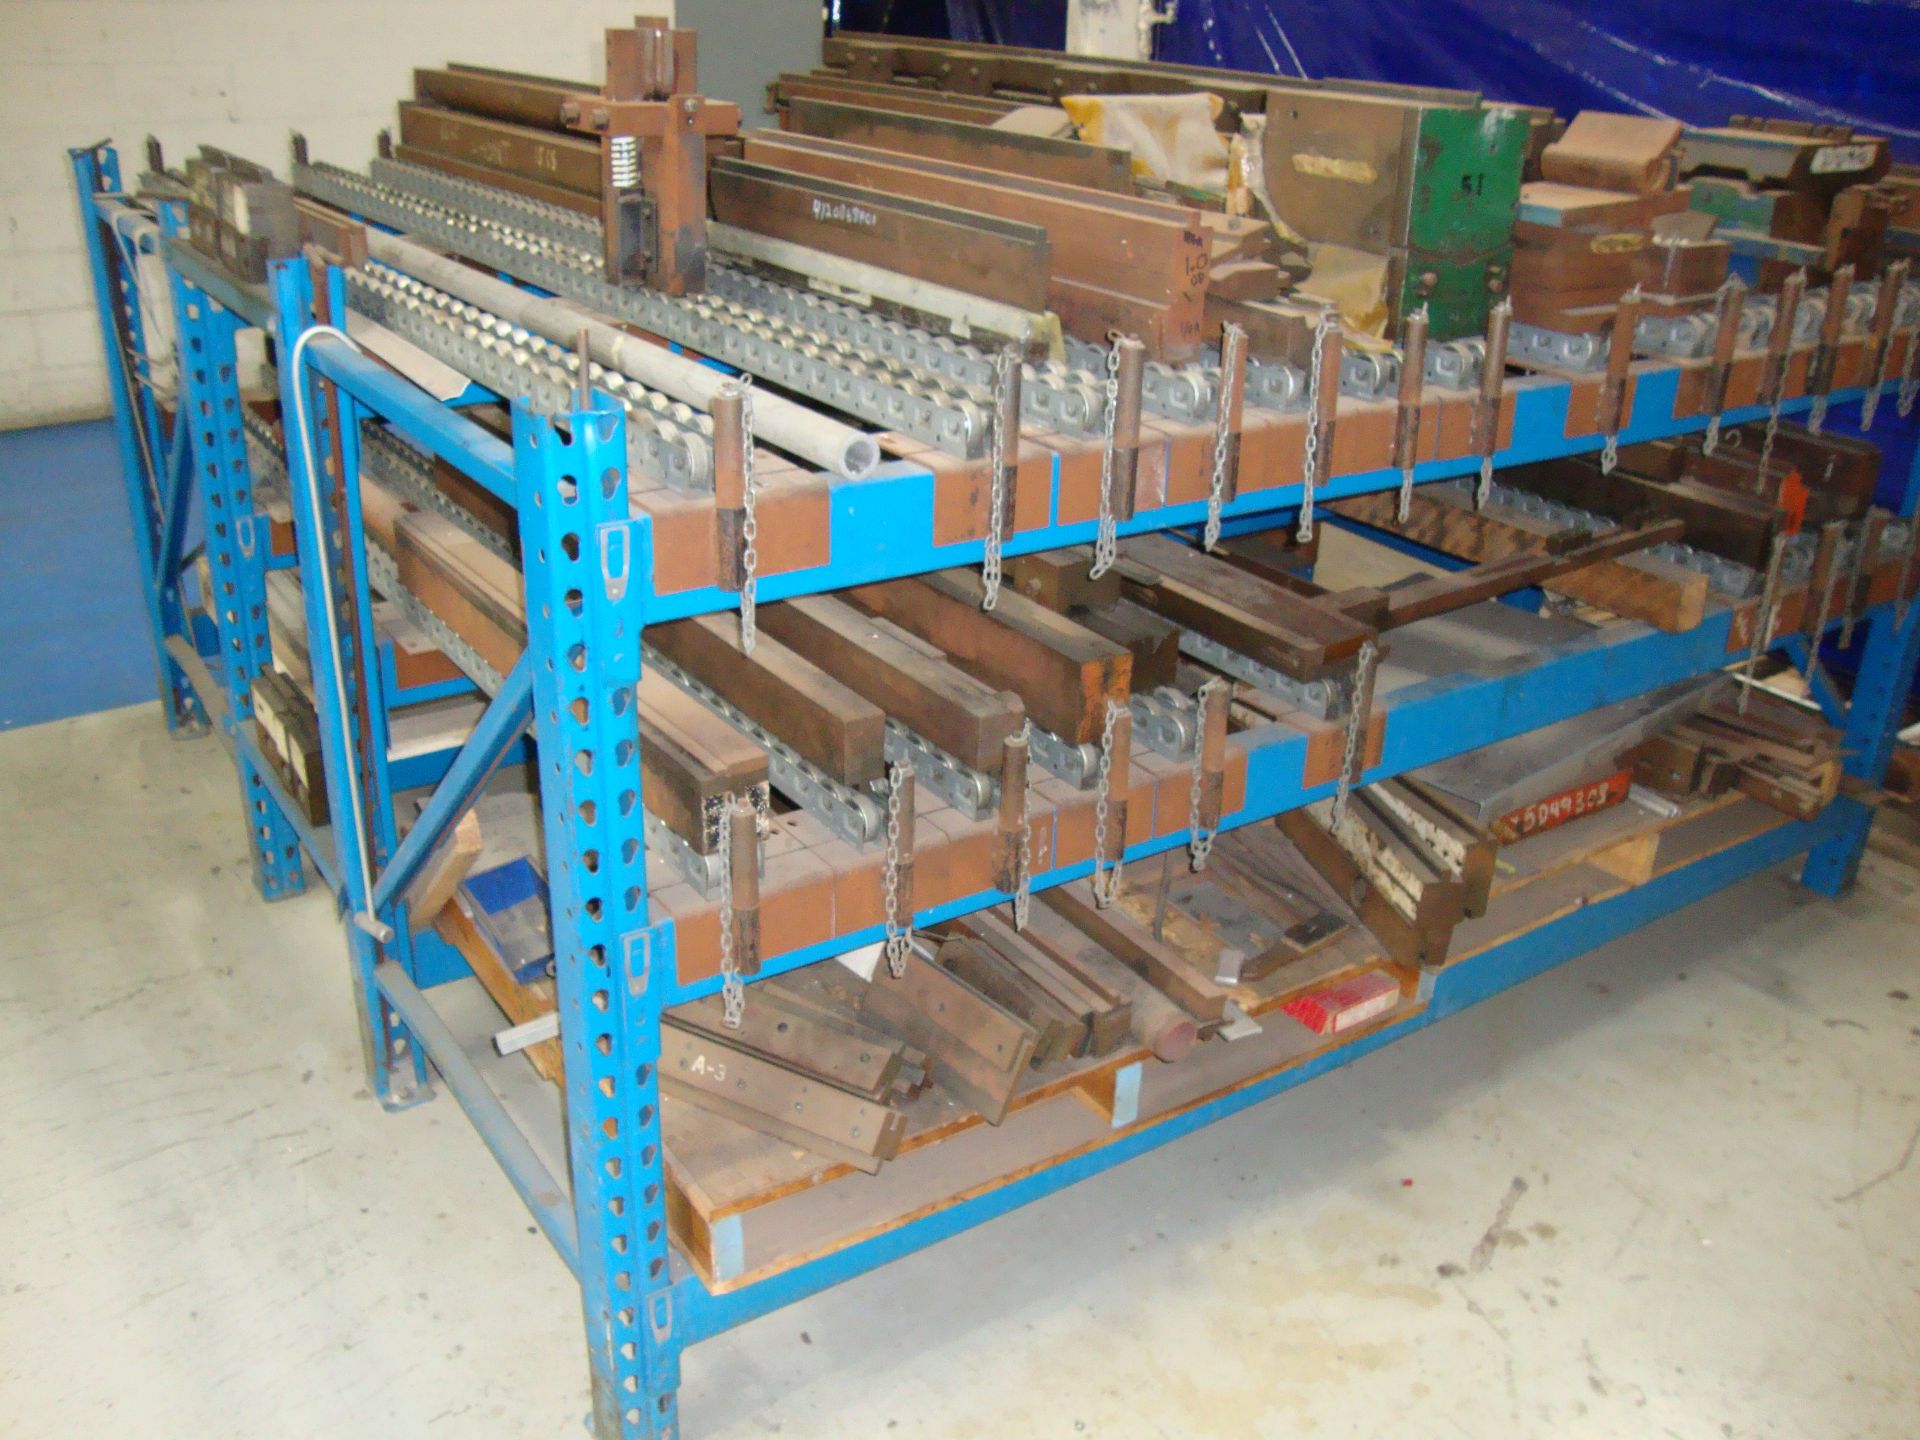 Press Brake Rolling Tooling Rack ONLY, approx. 103" x 96" x 48" tall - Image 4 of 5